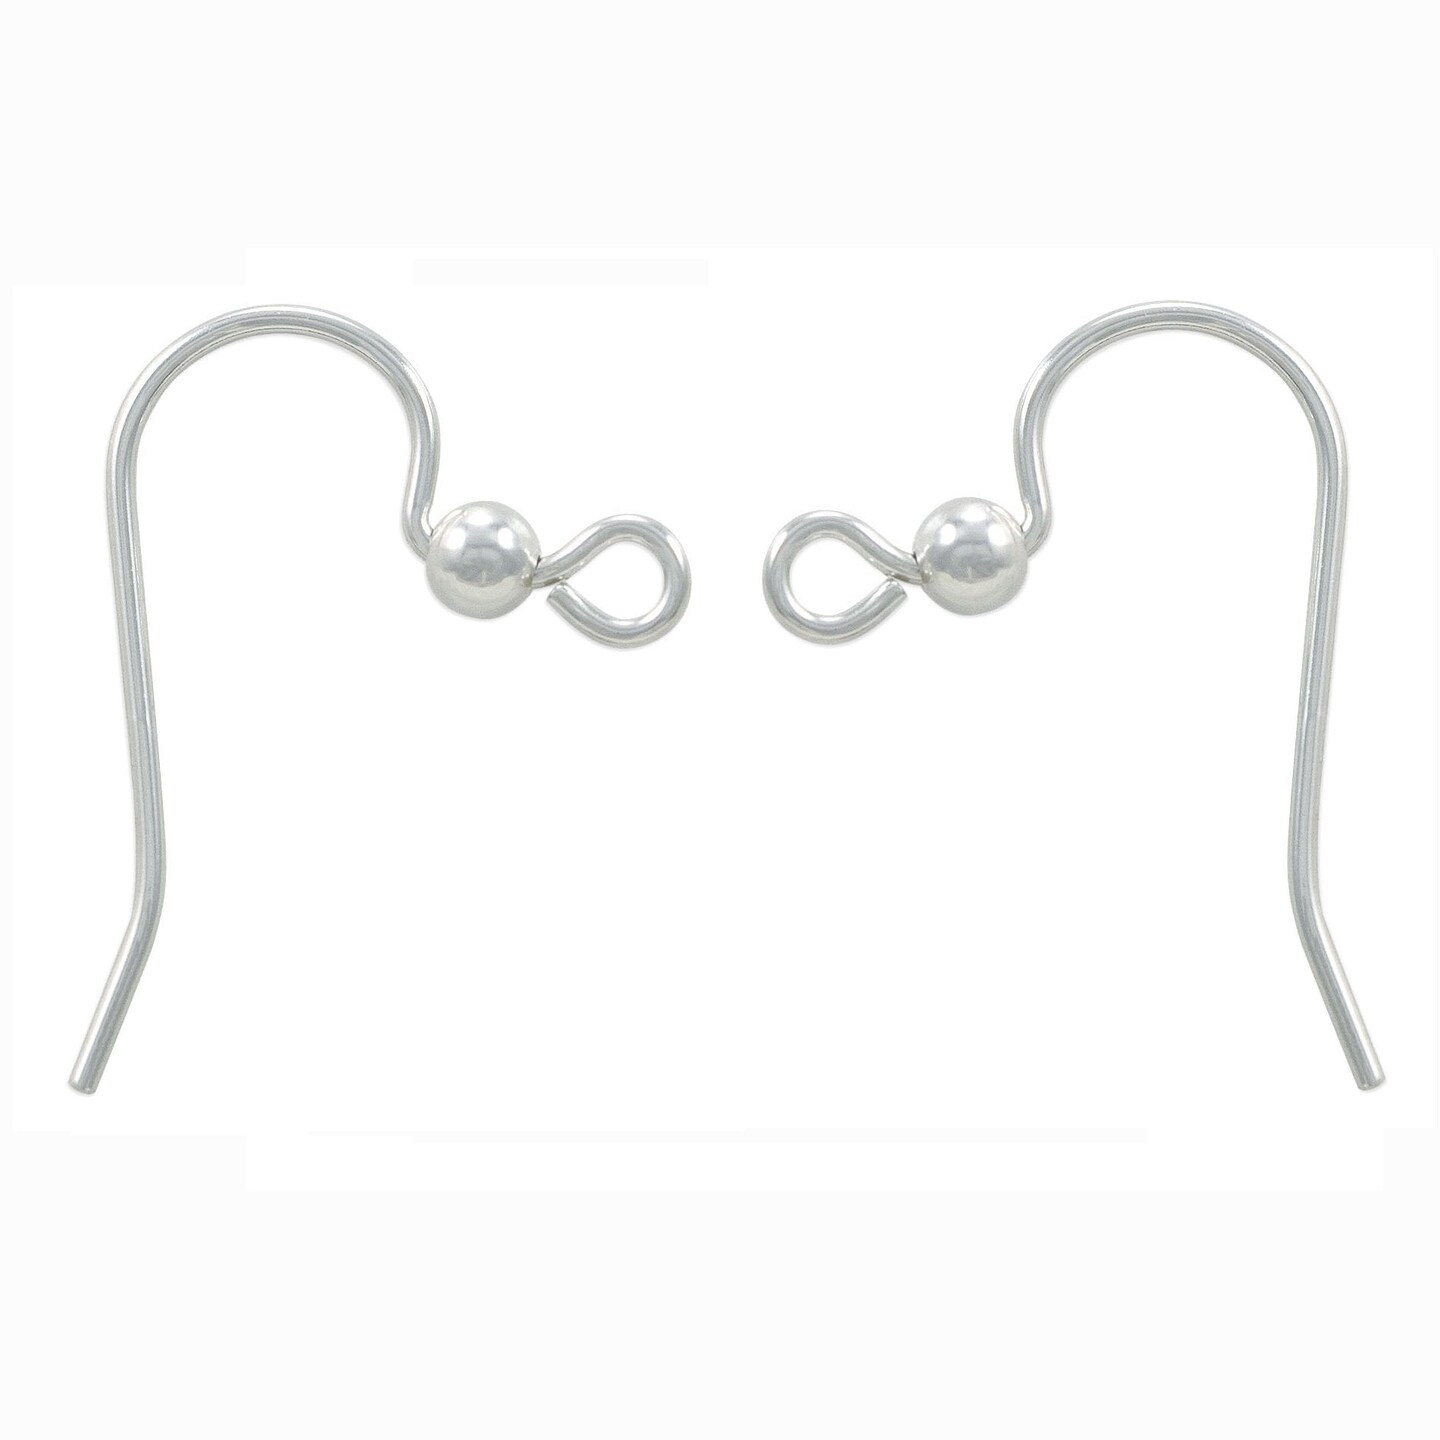 JewelrySupply Sterling Silver Earring Wires with 3mm Bead (1 Pair of  Sterling Silver Earrings)